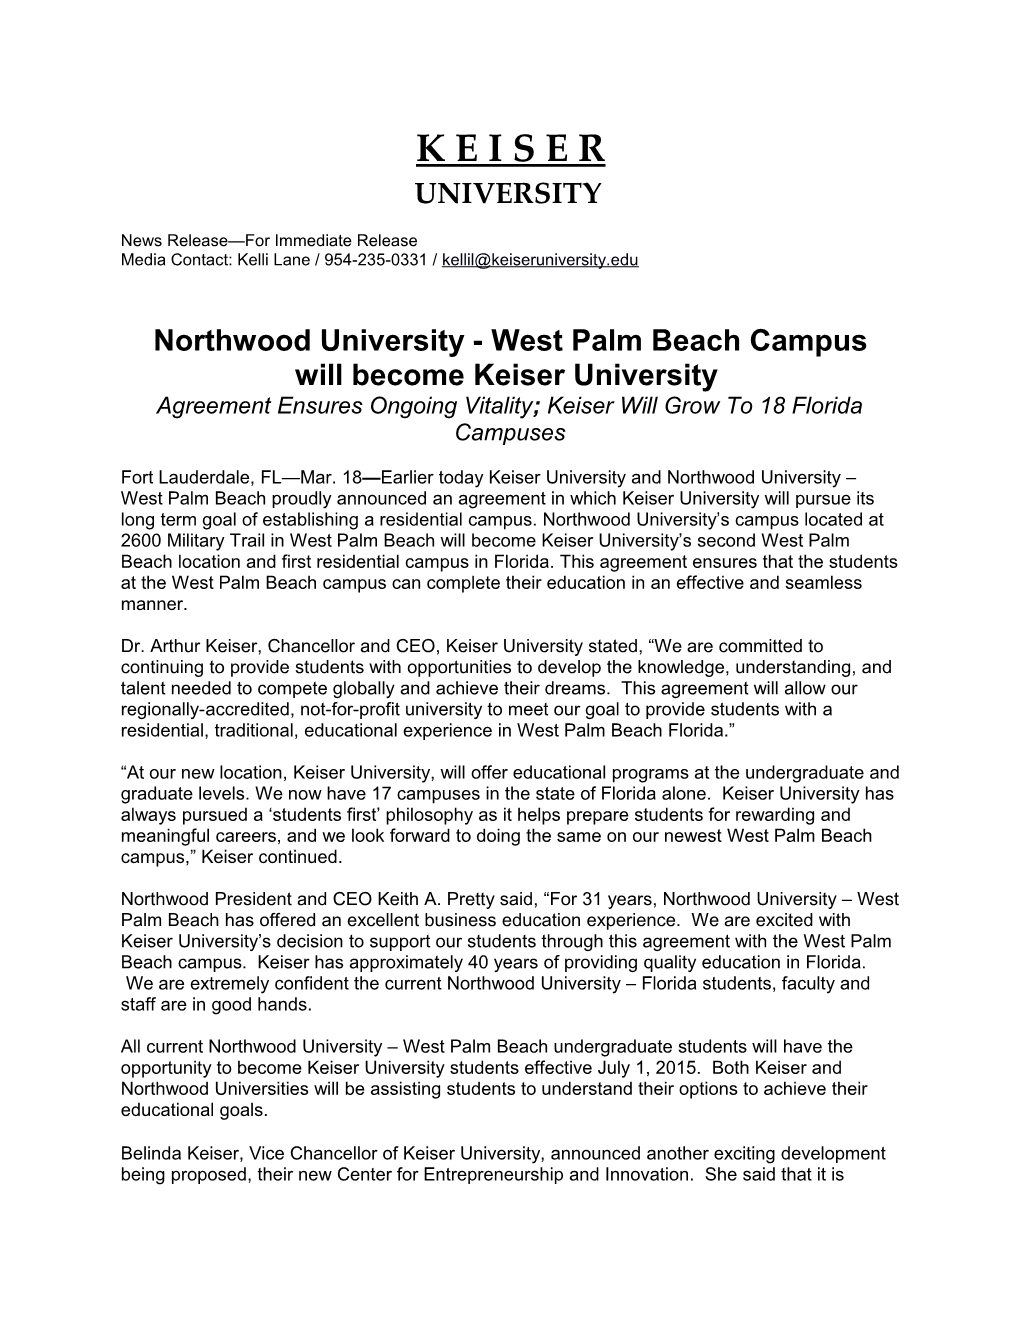 Northwood University - West Palm Beach Campus Will Become Keiser University